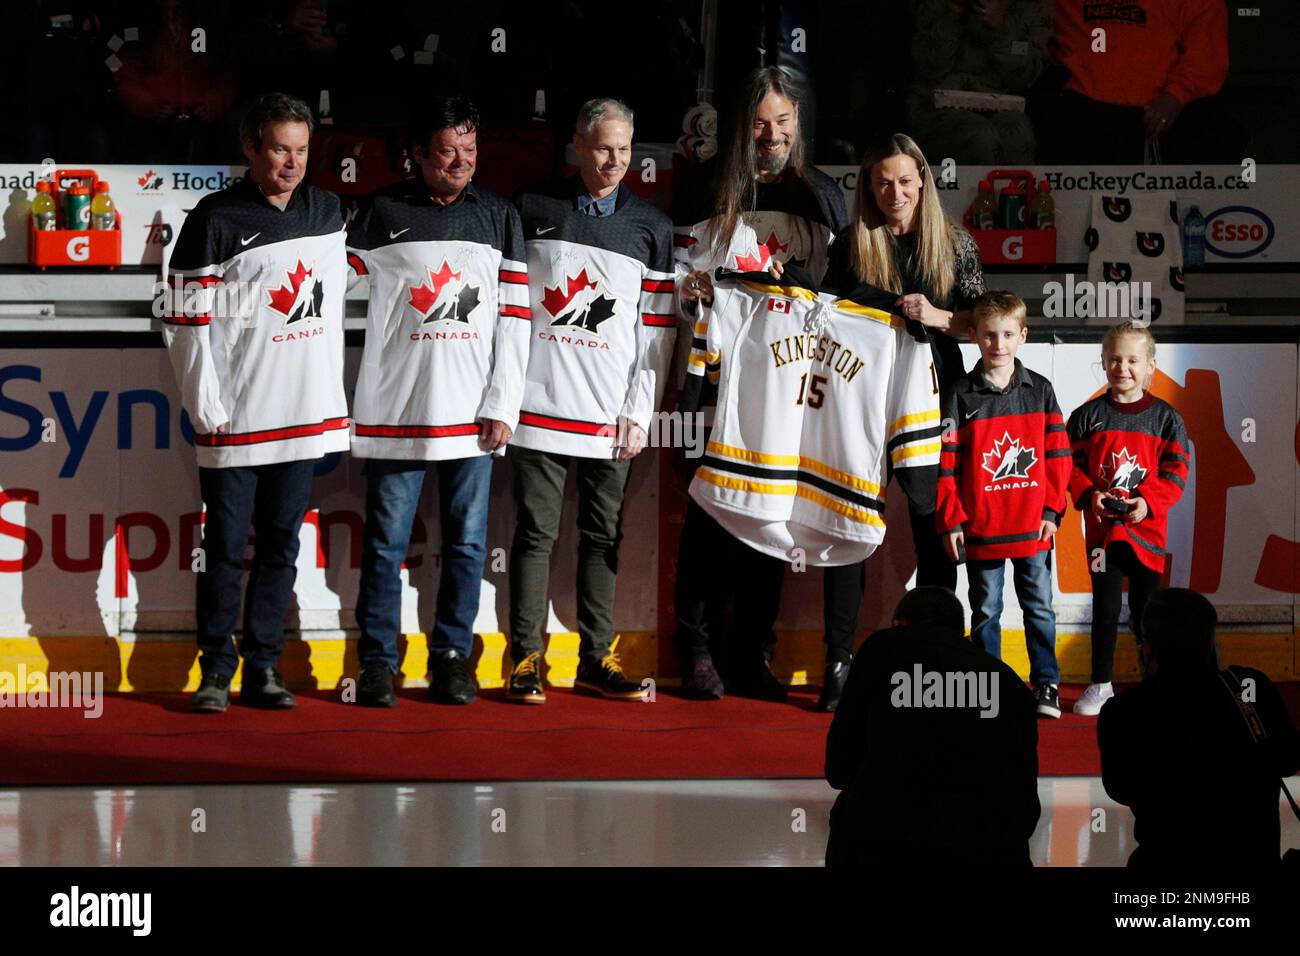 Jayna Hefford, third from right, is presented with a hockey jersey from  members of "The Tragically Hip" before her own jersey is raised to the  rafters prior to Rivalry series hockey game